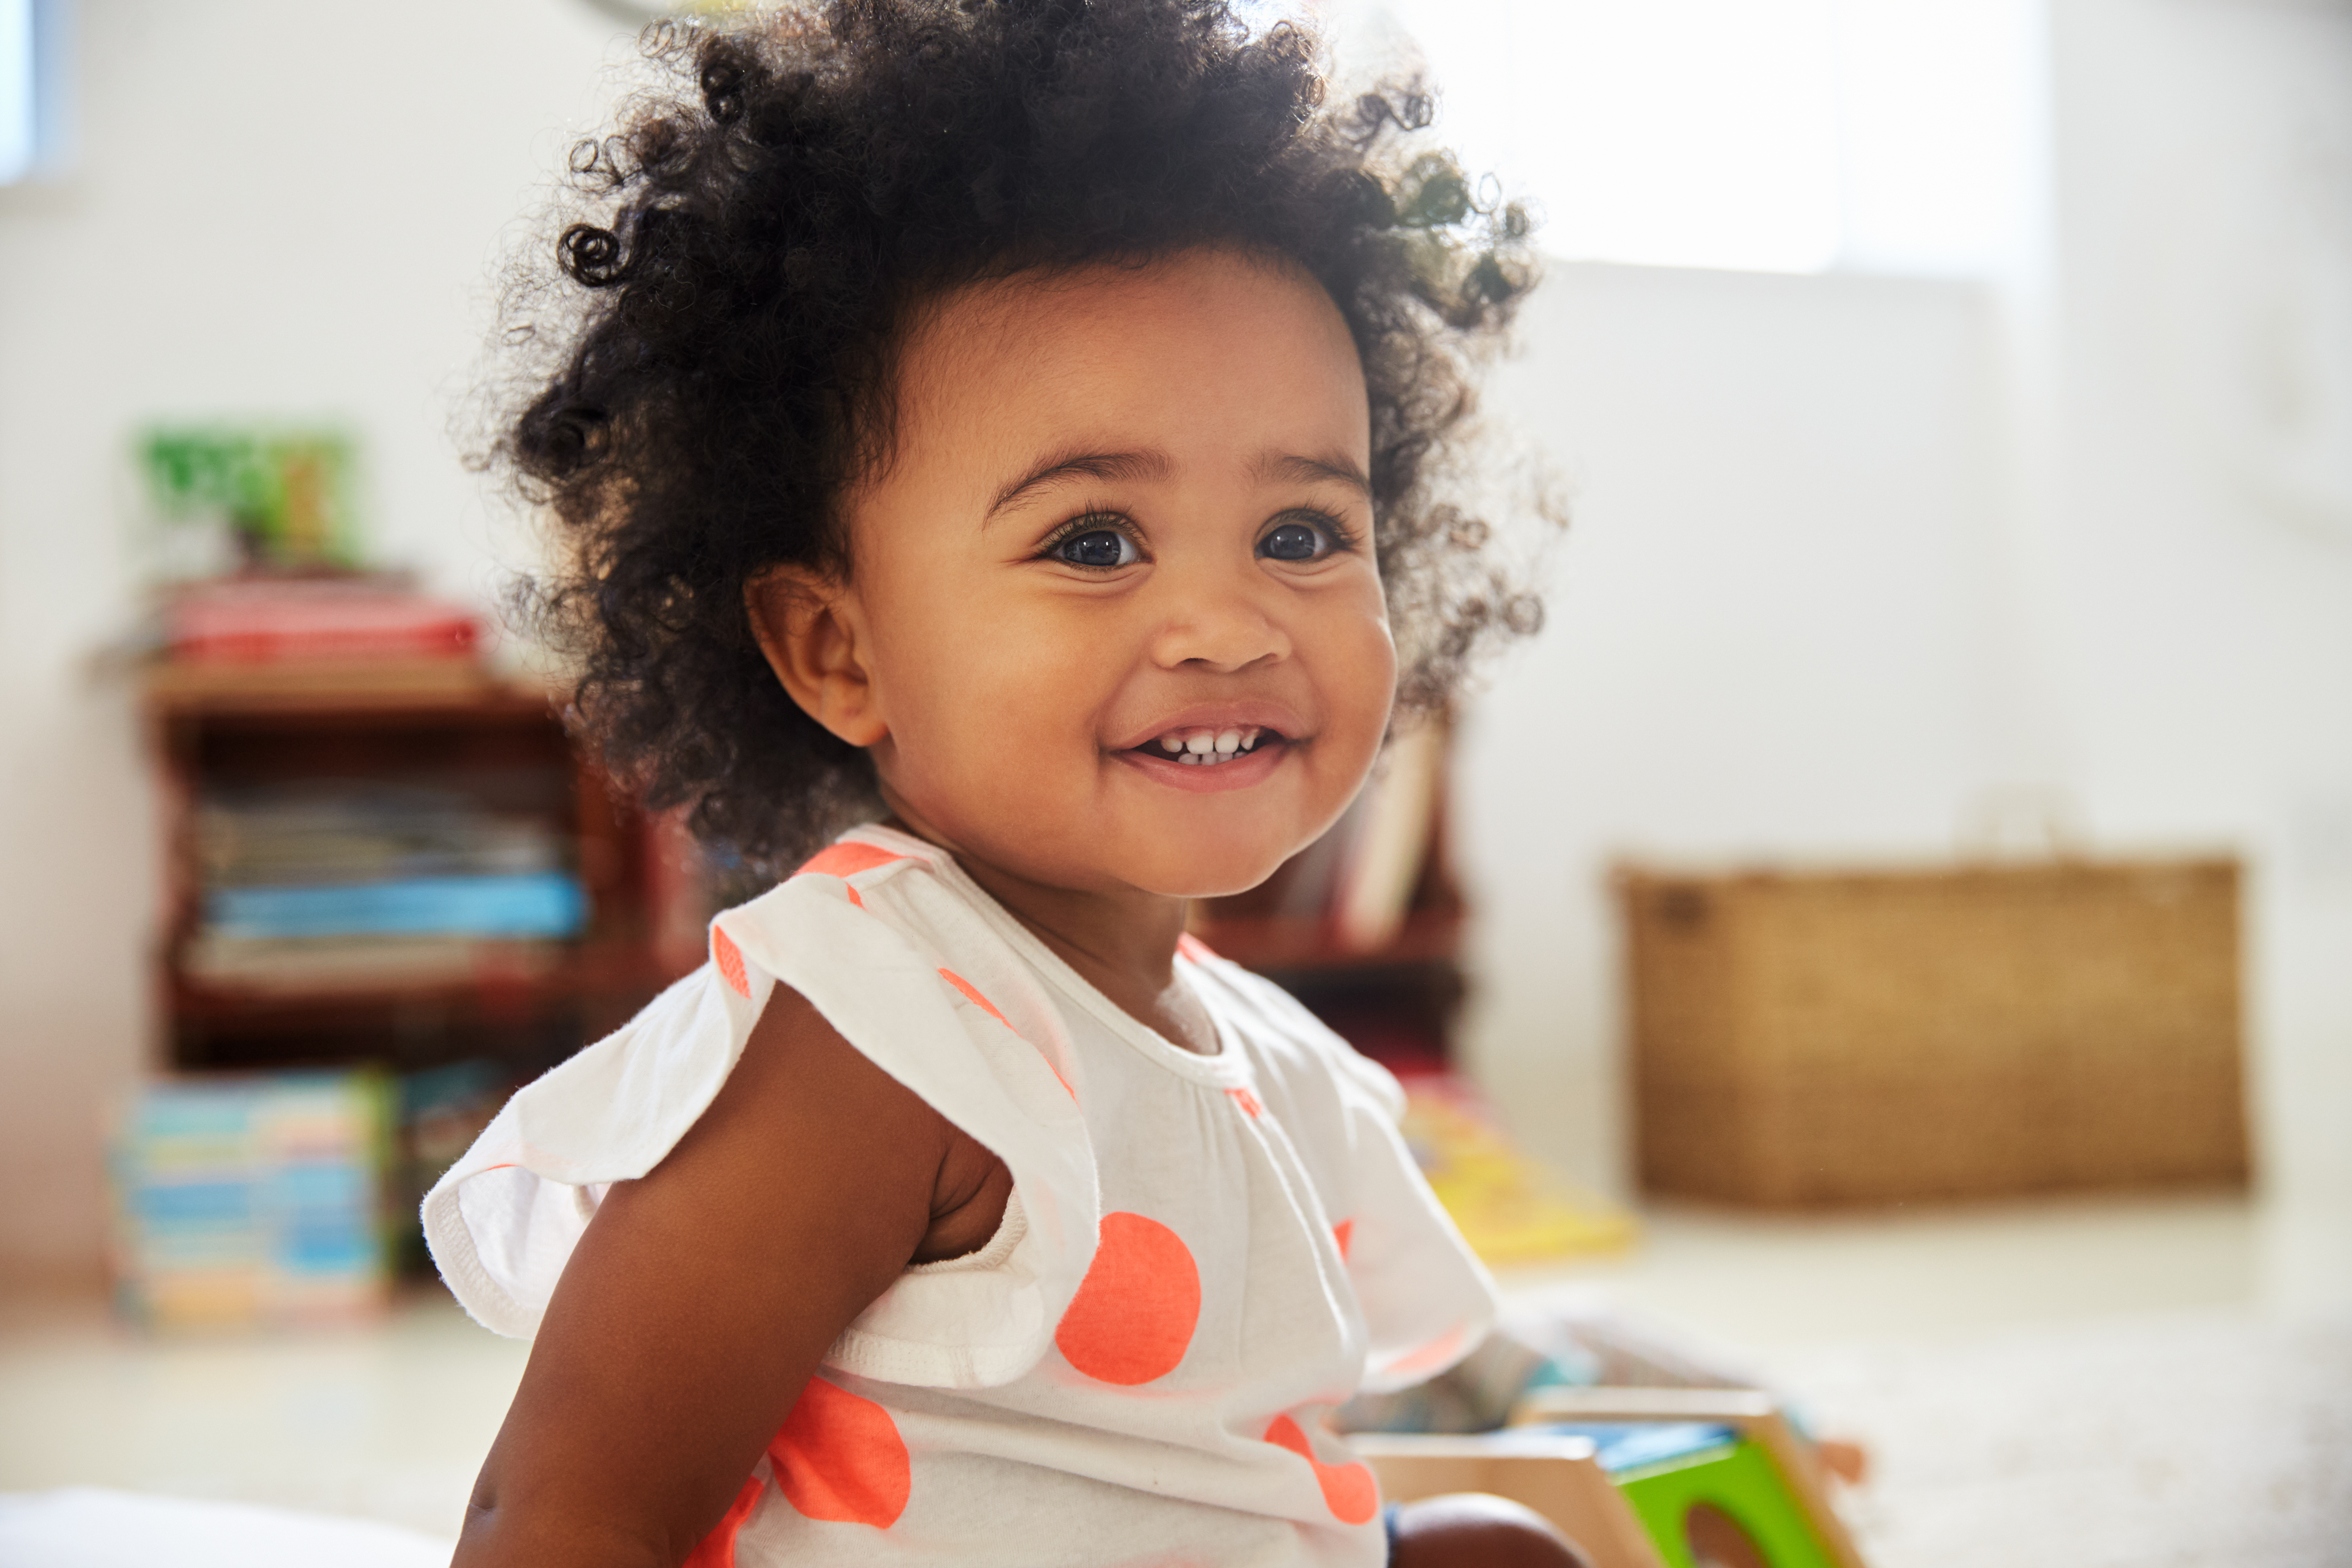 A little girl smiling in a playroom | Source: Shutterstock